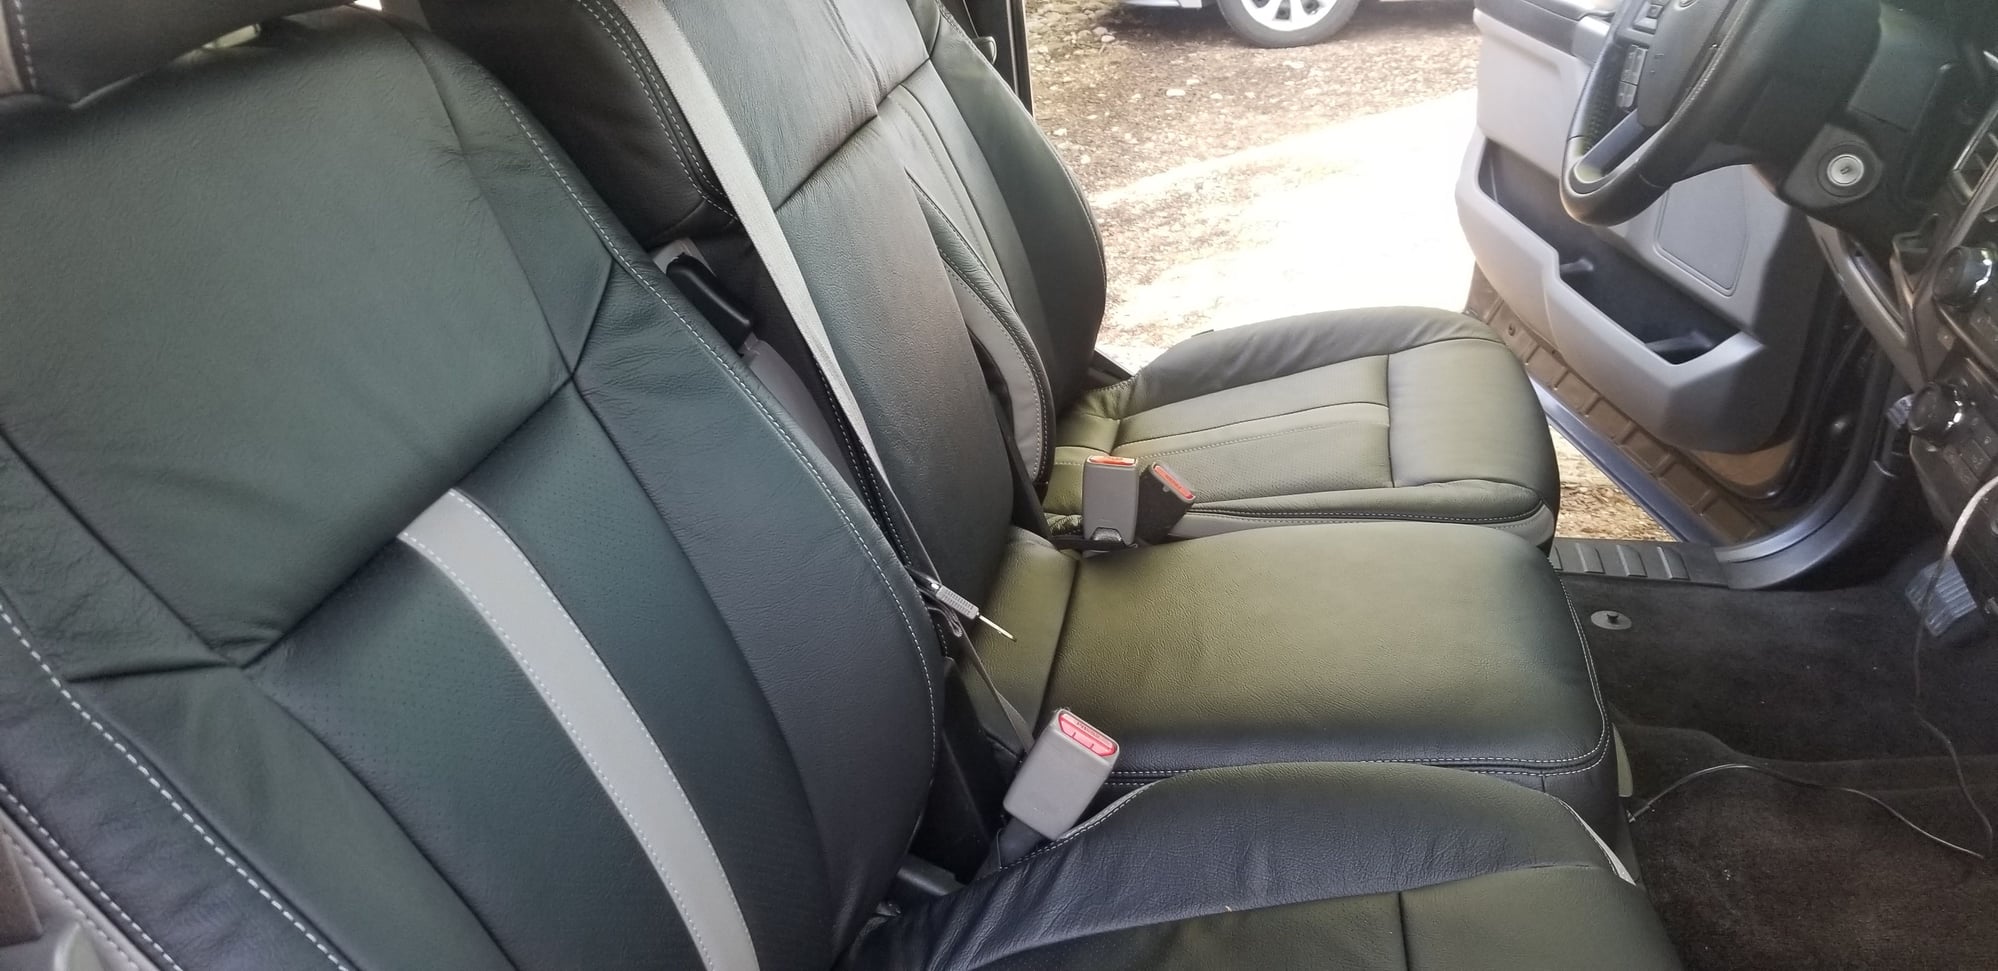 03-05 Dodge Ram Driver Side Seat Cushion - Cloth, Leather and